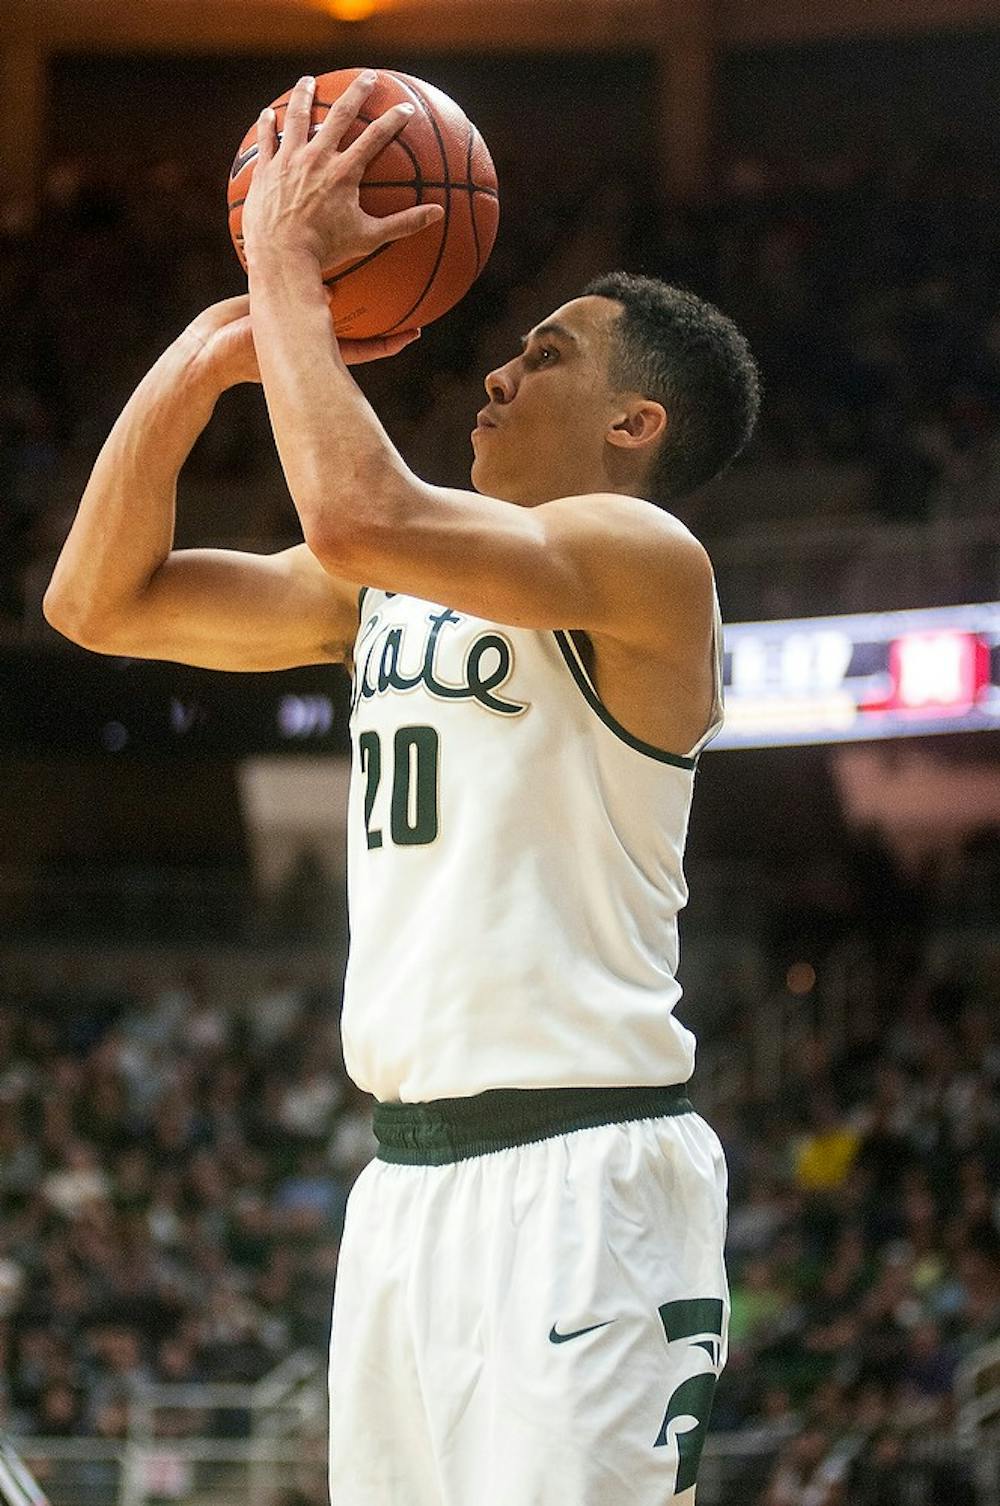 <p>Senior guard Travis Trice takes a jump shot during the game against Maryland on Dec. 30, 2014, at Breslin Center. The Spartans were defeated by the Terrapins, 68-66 in double overtime. Danyelle Morrow/The State News</p>